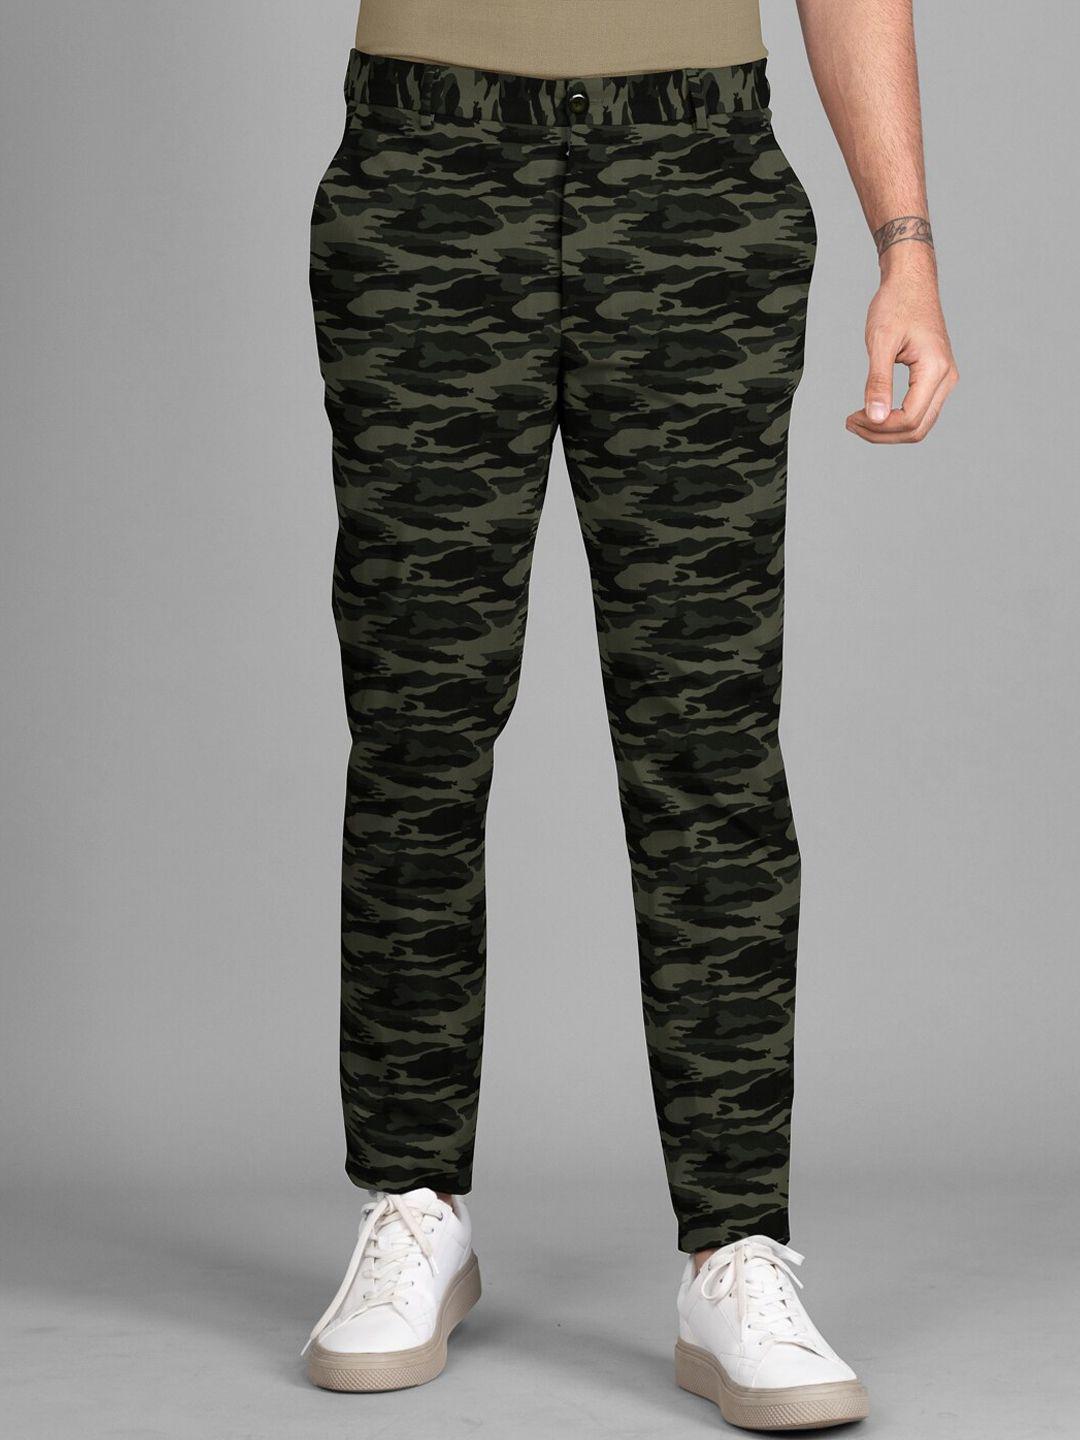 the pant project men camouflage printed cotton tailored slim fit wrinkle free trousers